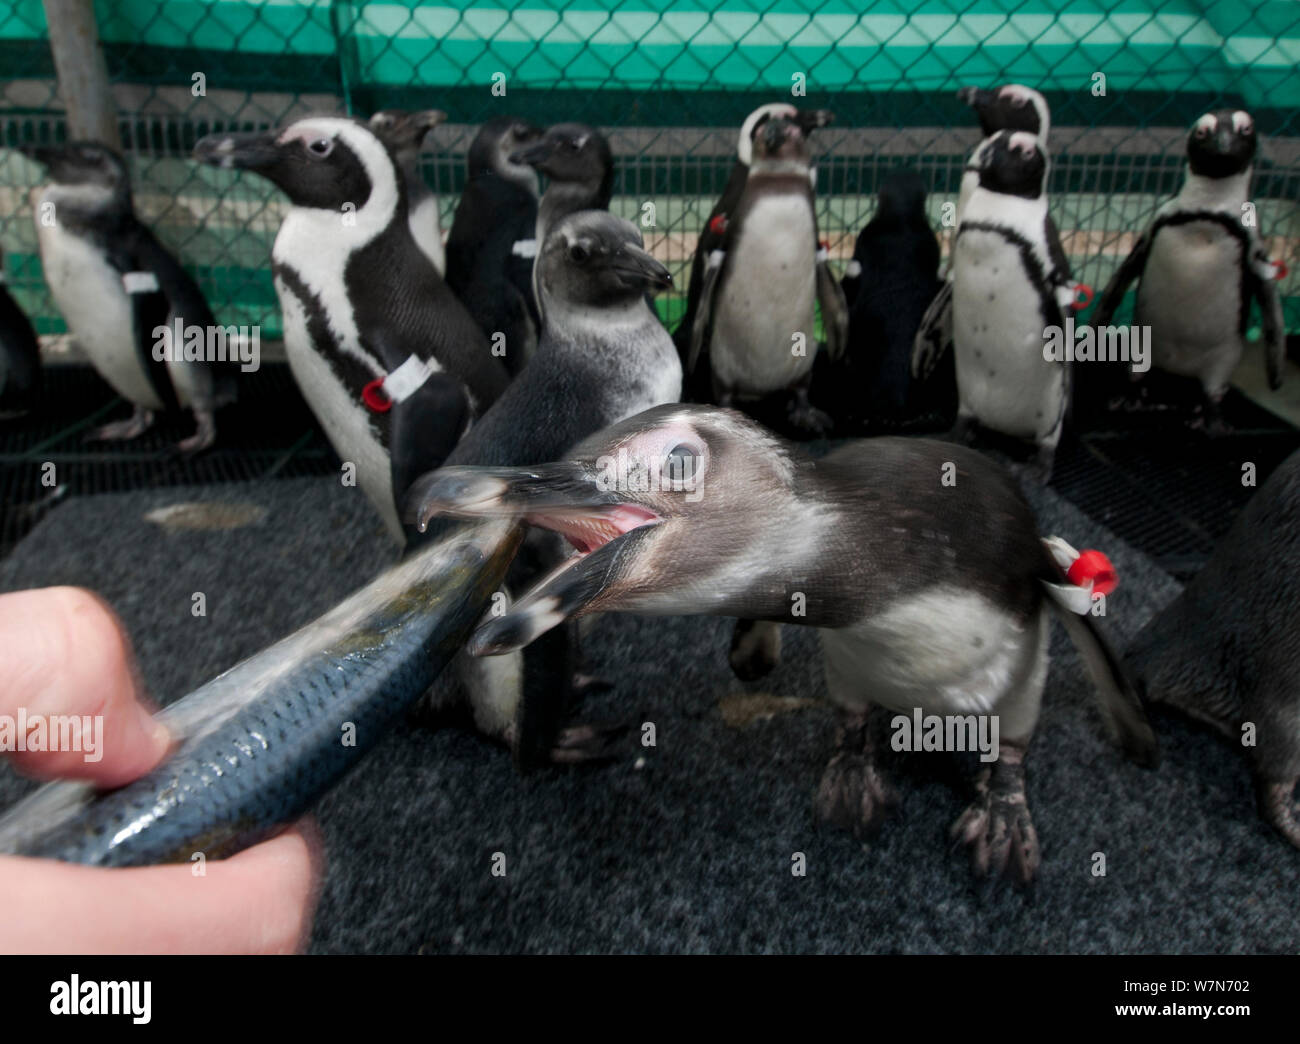 Black footed penguin (Spheniscus demersus) being hand fed as part of eehabilitation at Southern African Foundation for the Conservation of Coastal Birds (SANCCOB) Cape Town, South Africa Stock Photo